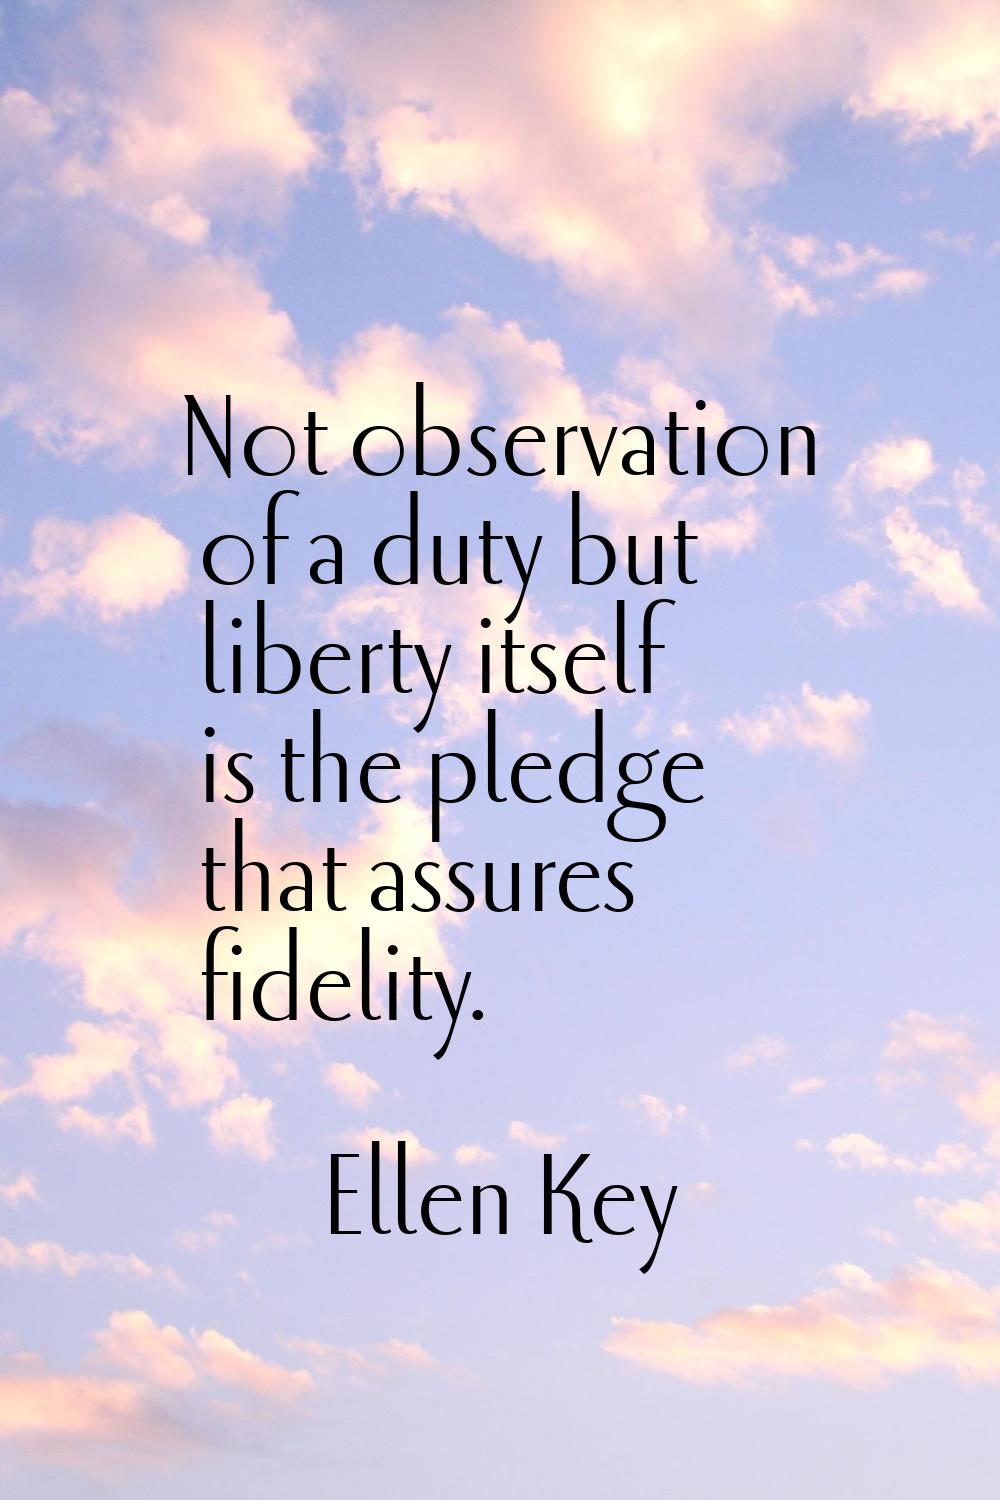 Not observation of a duty but liberty itself is the pledge that assures fidelity.